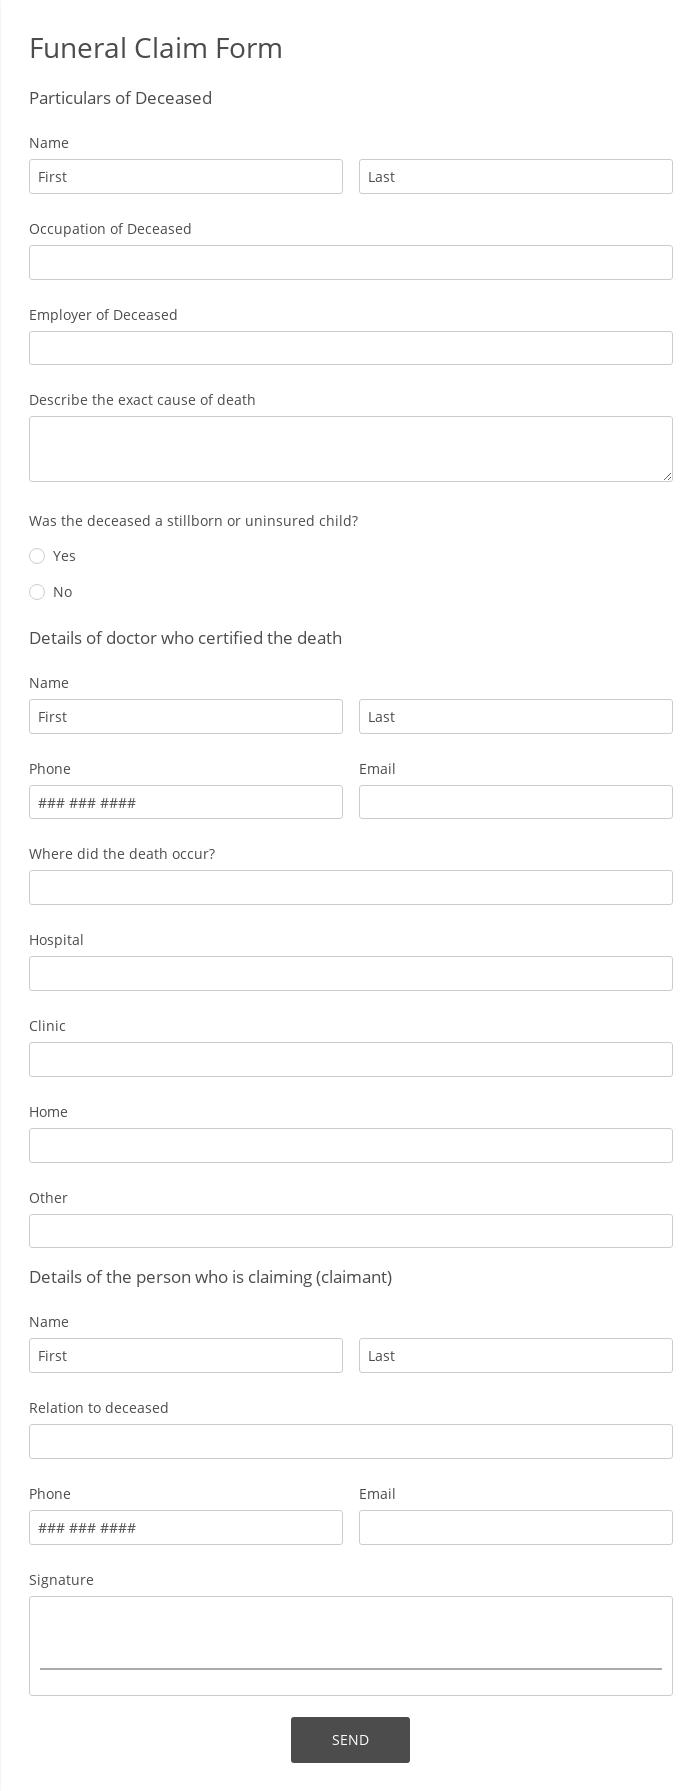 Funeral Claim Form